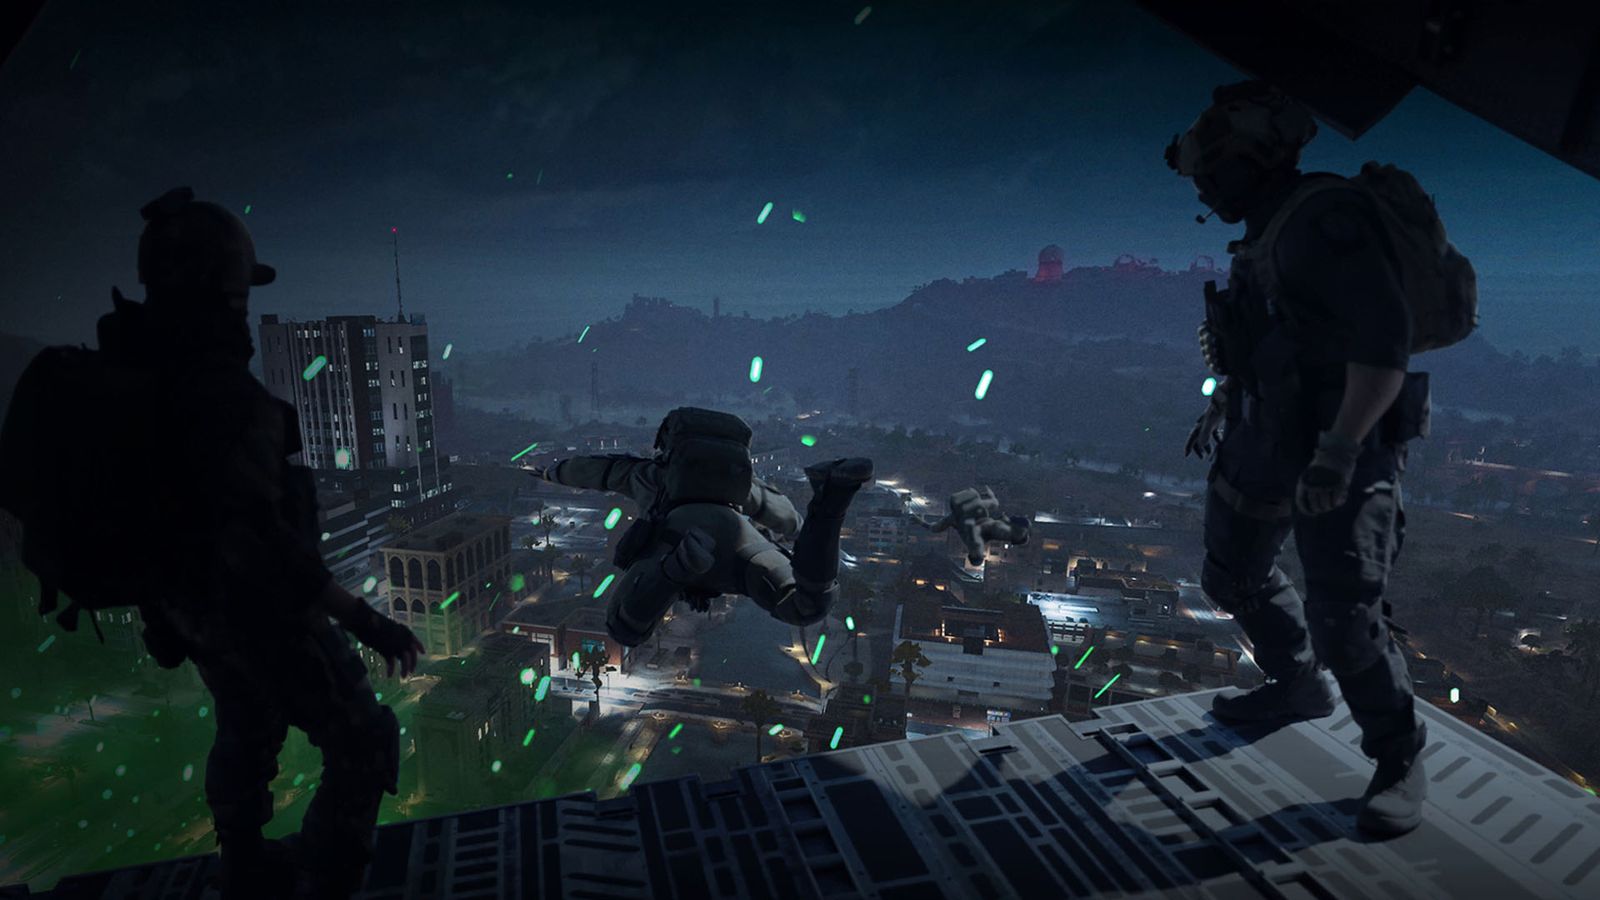 Warzone players jumping out of plane into night-time town